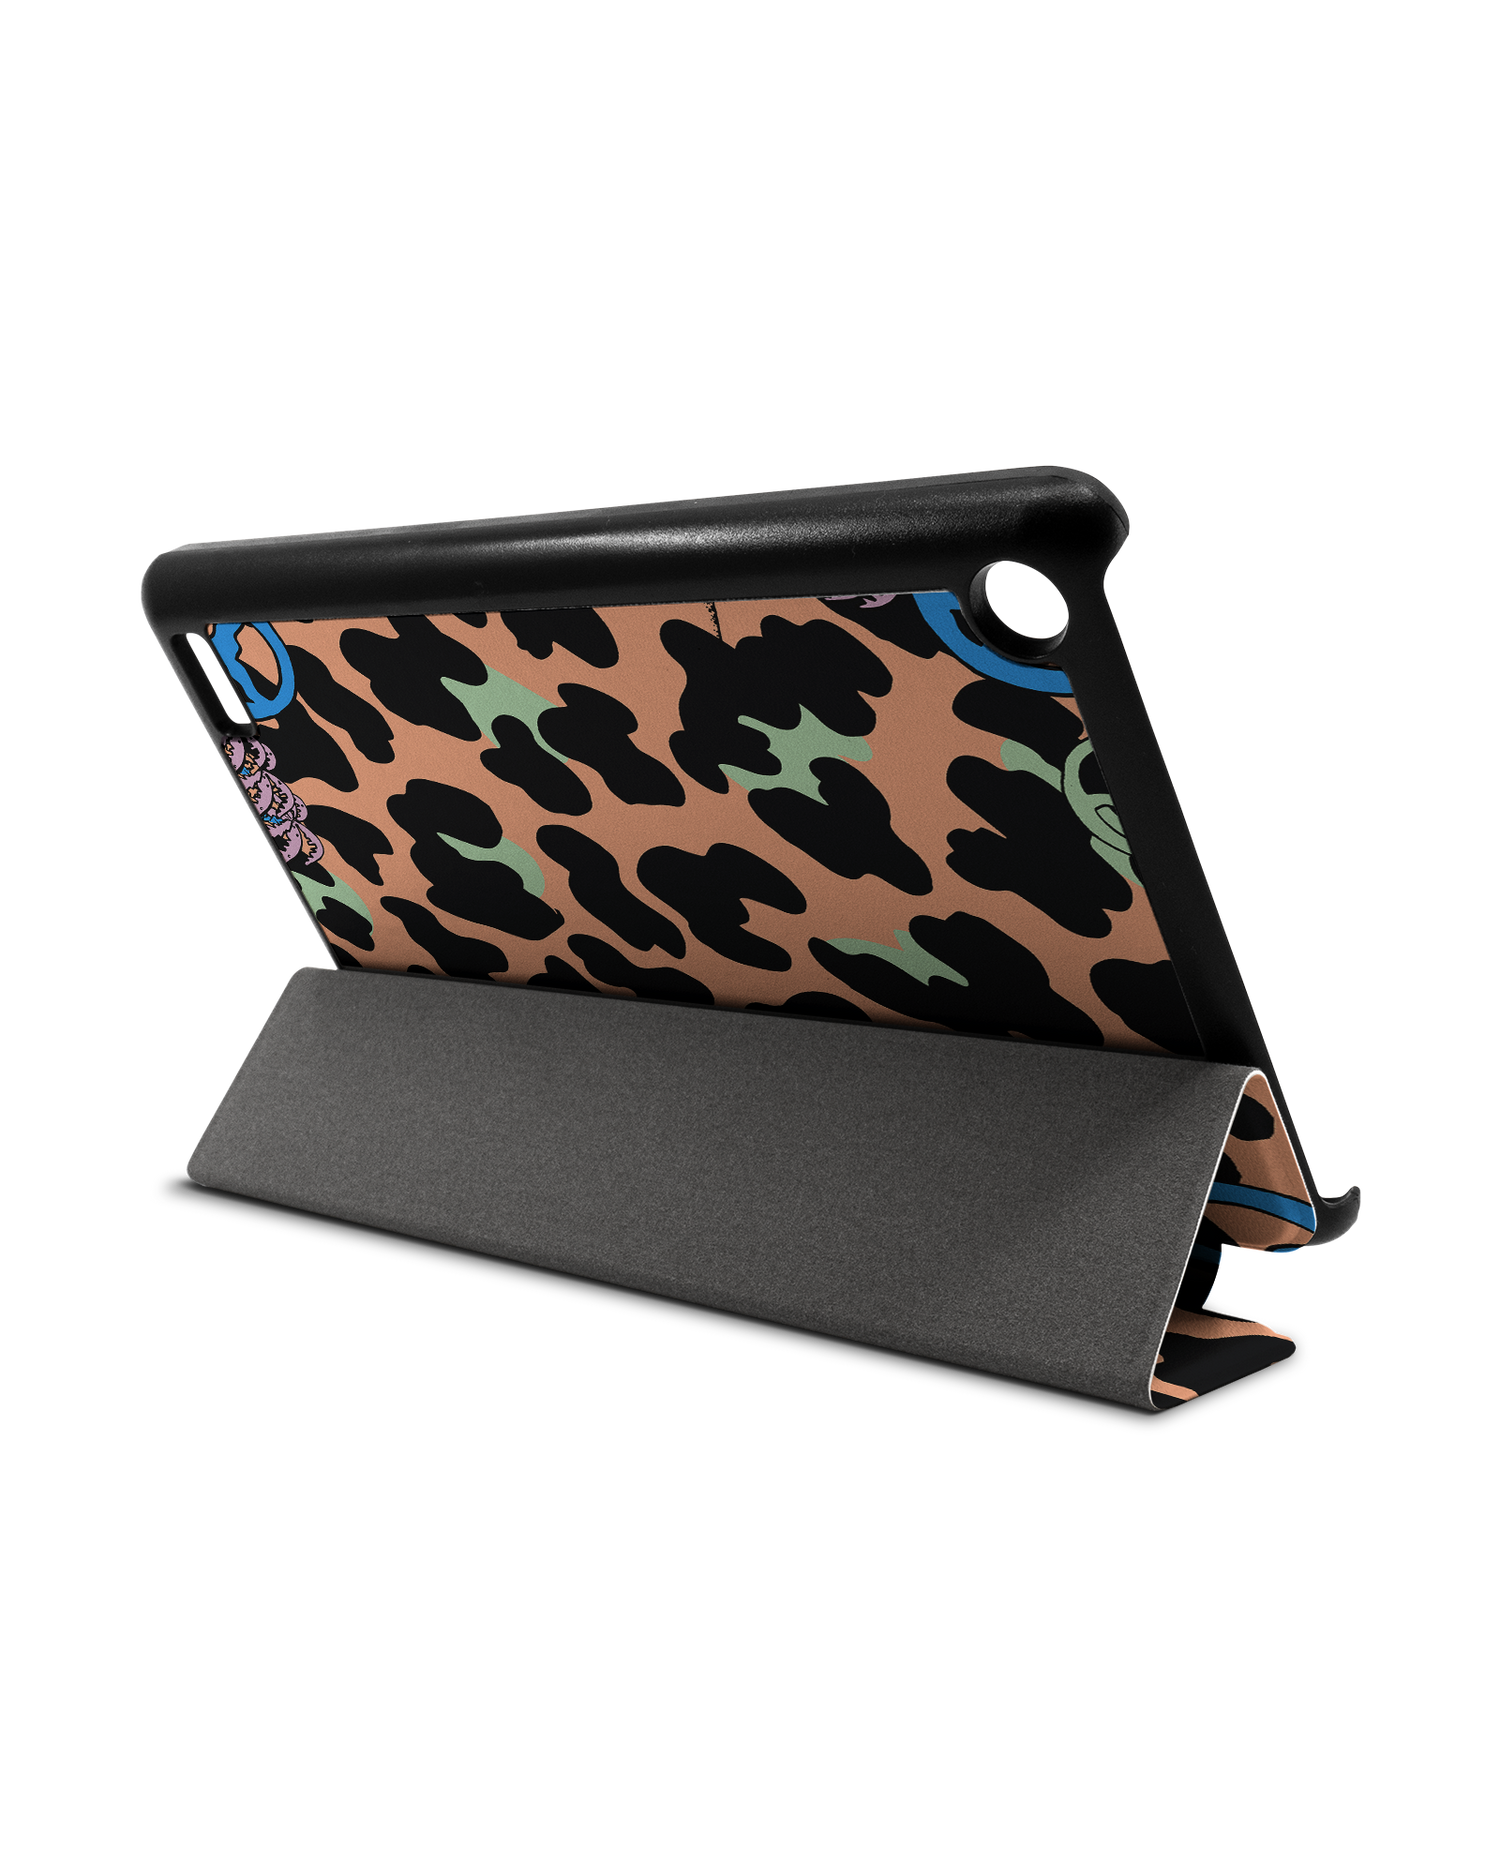 Leopard Peace Palms Tablet Smart Case for Amazon Fire 7: Used as Stand